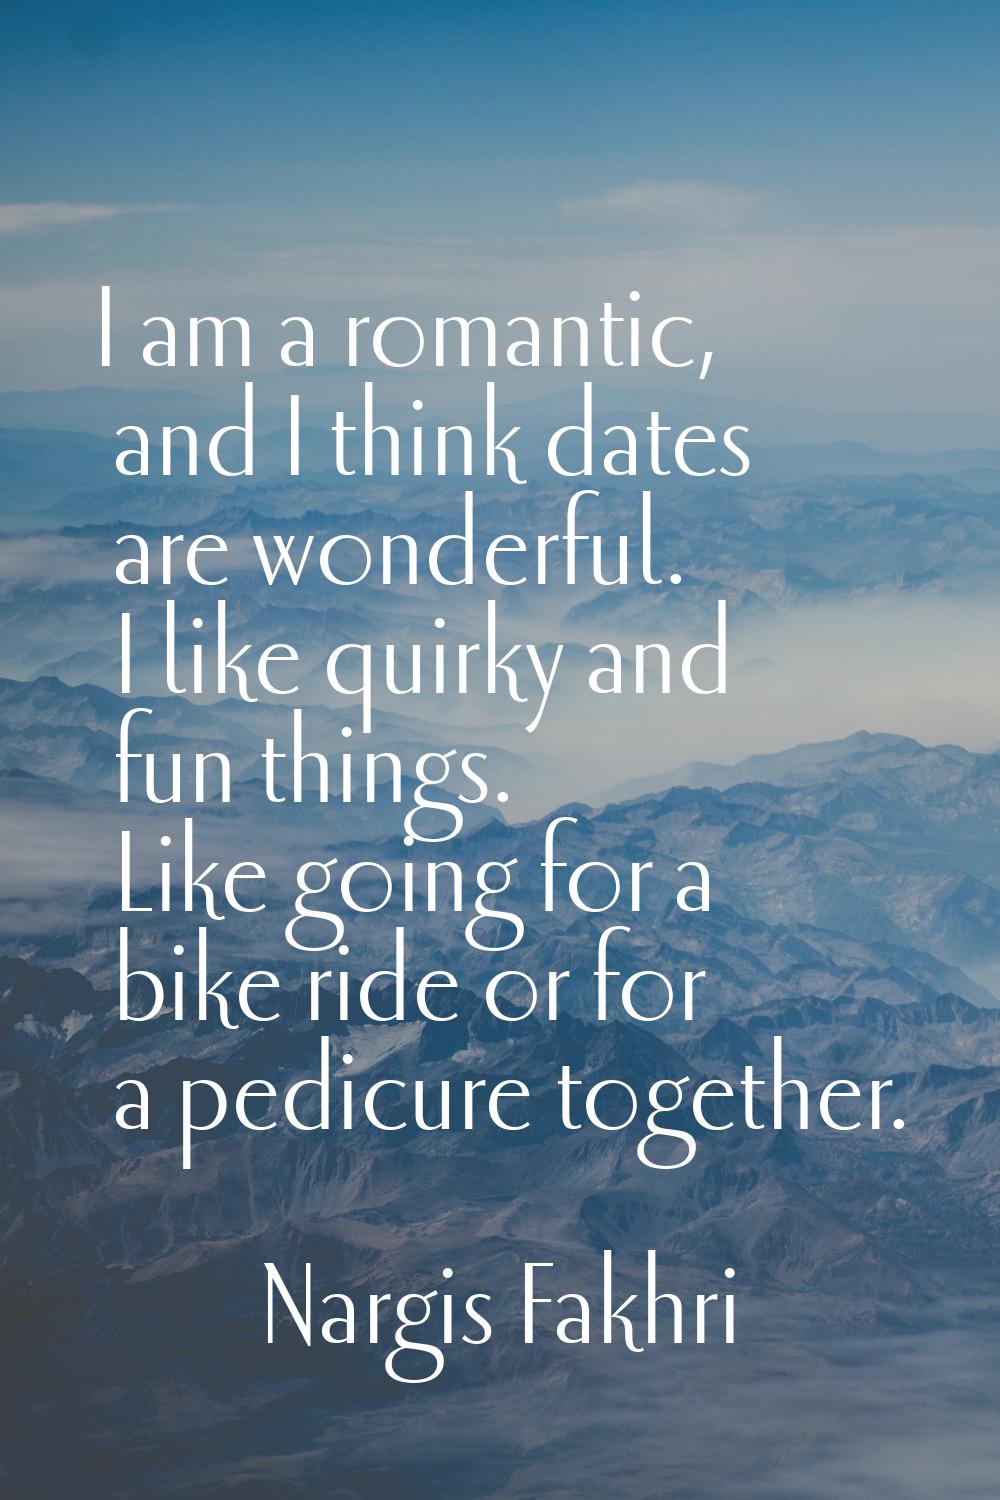 I am a romantic, and I think dates are wonderful. I like quirky and fun things. Like going for a bi